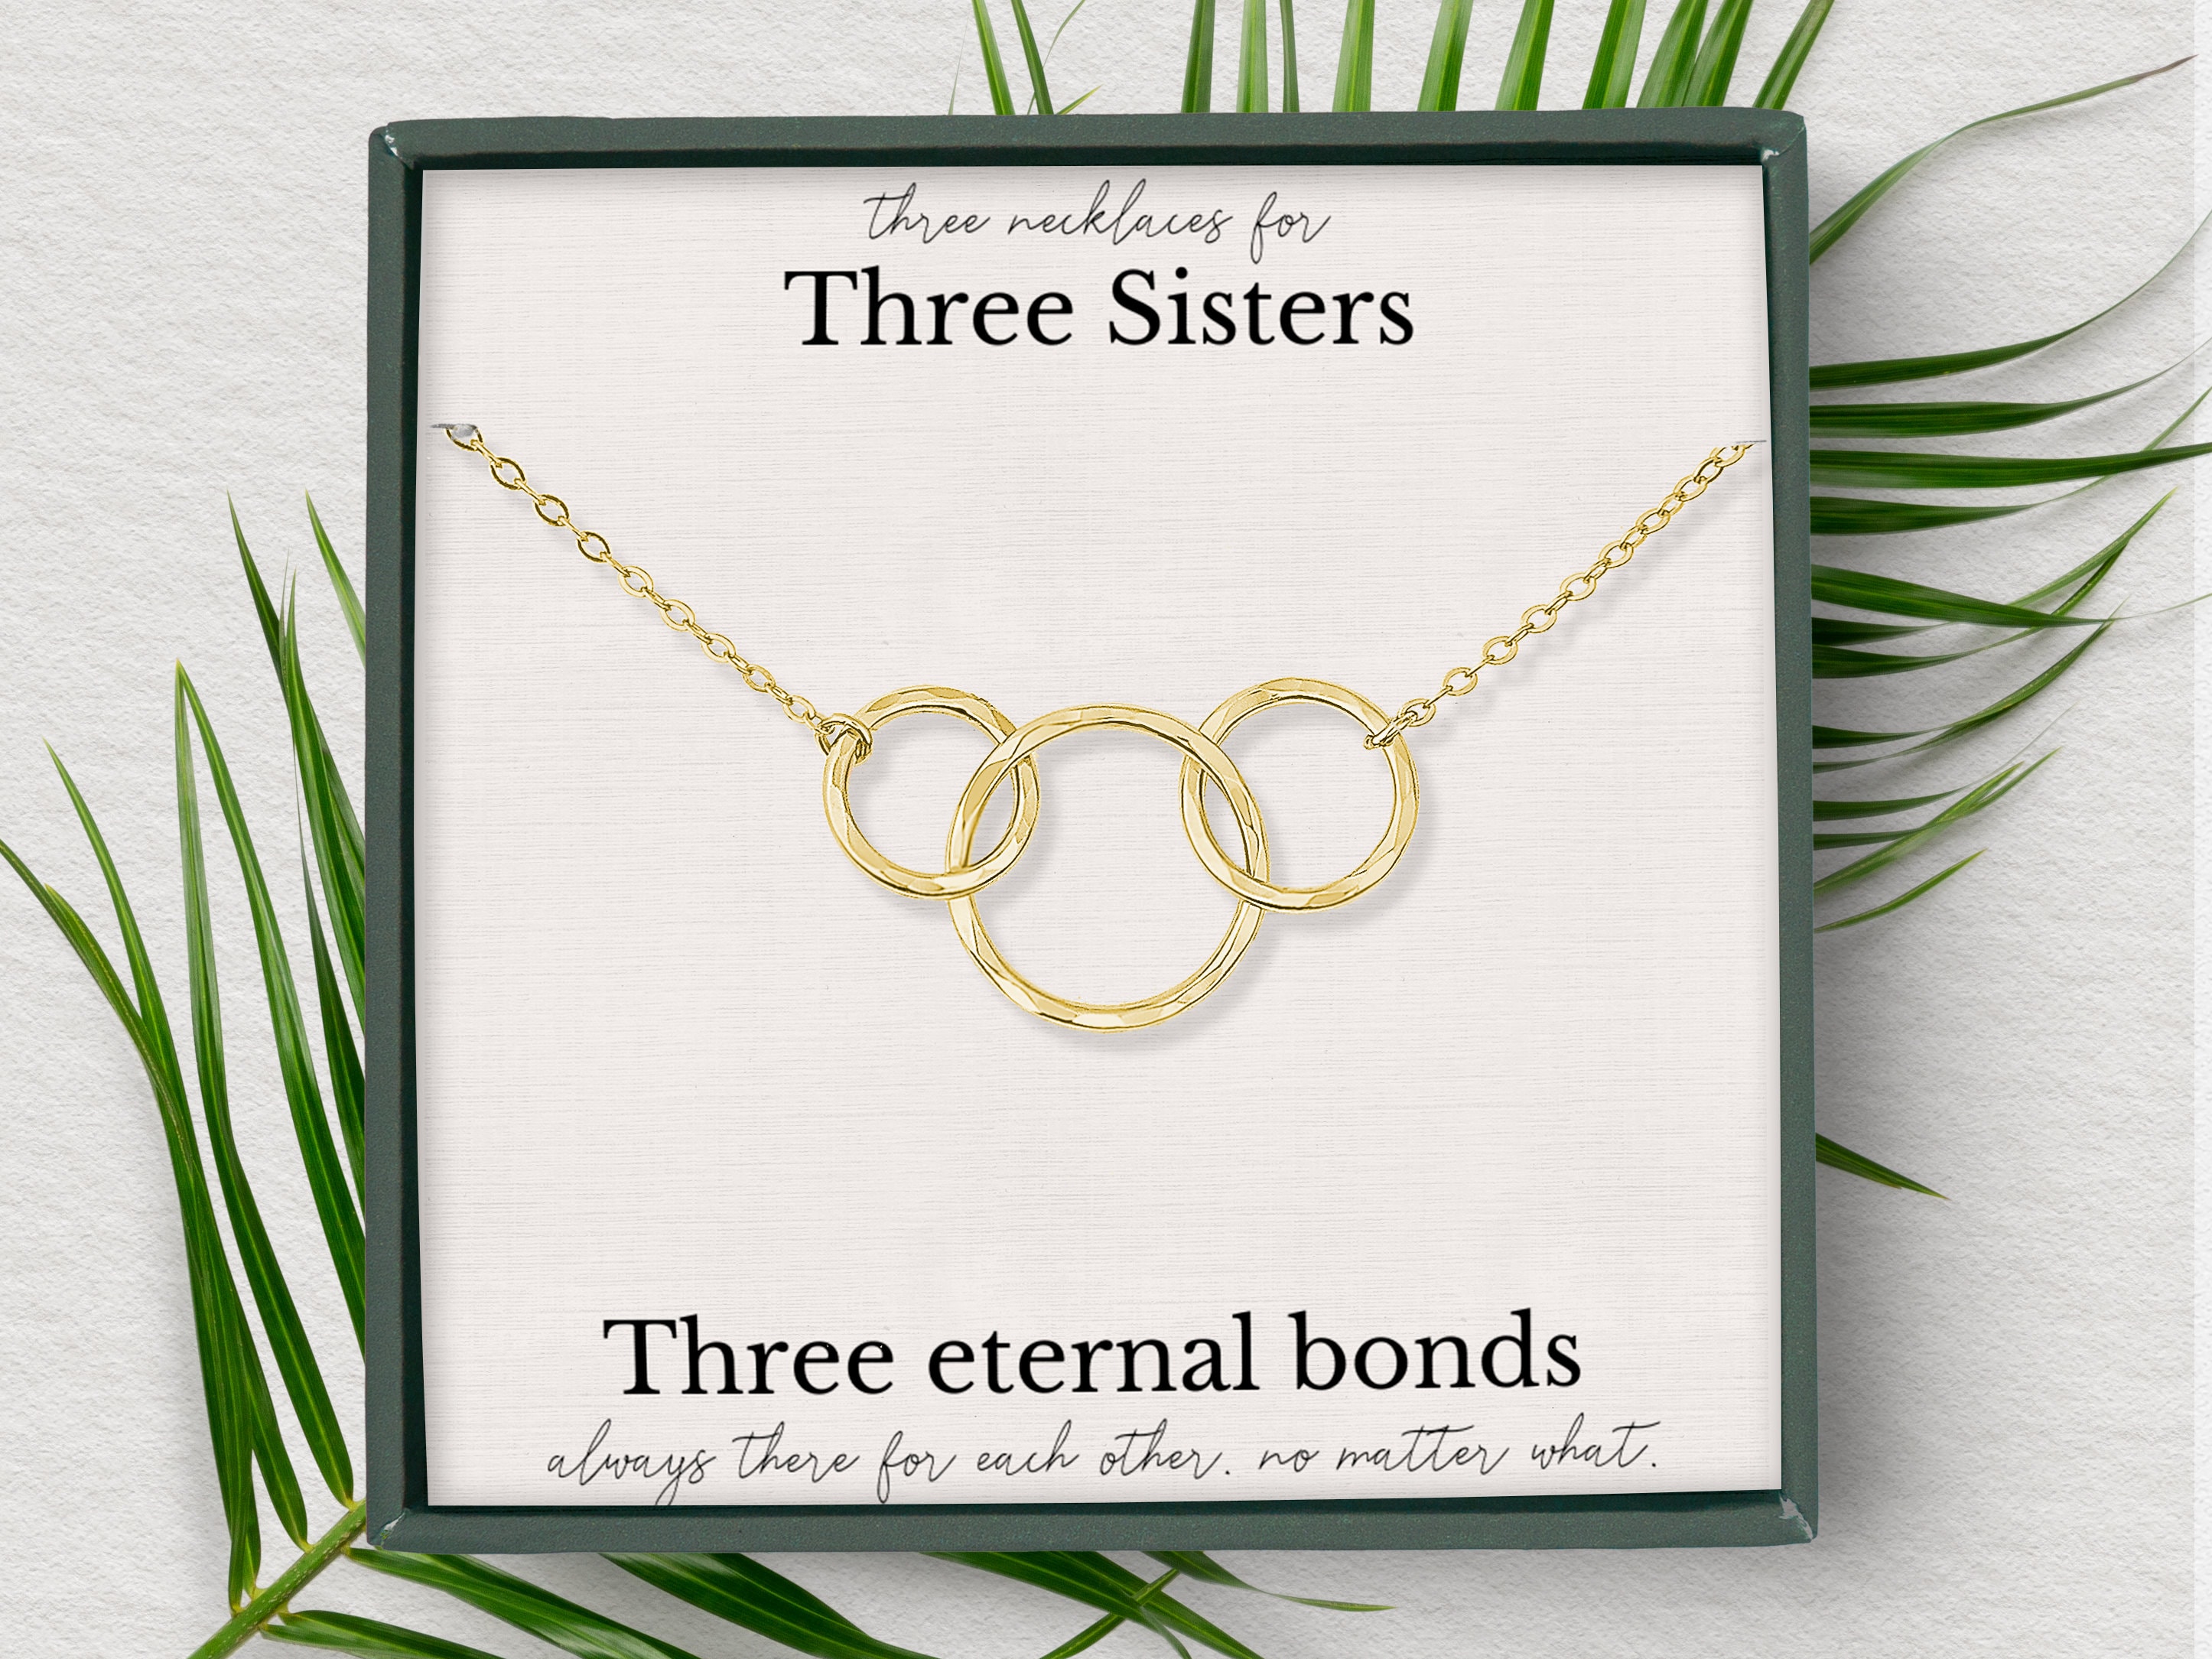 Three Cheers for Girls - Happy Thoughts Jewelry Set - Gold Jewelry Set - 3  Necklaces & 7 Kids Rings - Girls Jewelry for Kids & Tweens - Necklace Set 